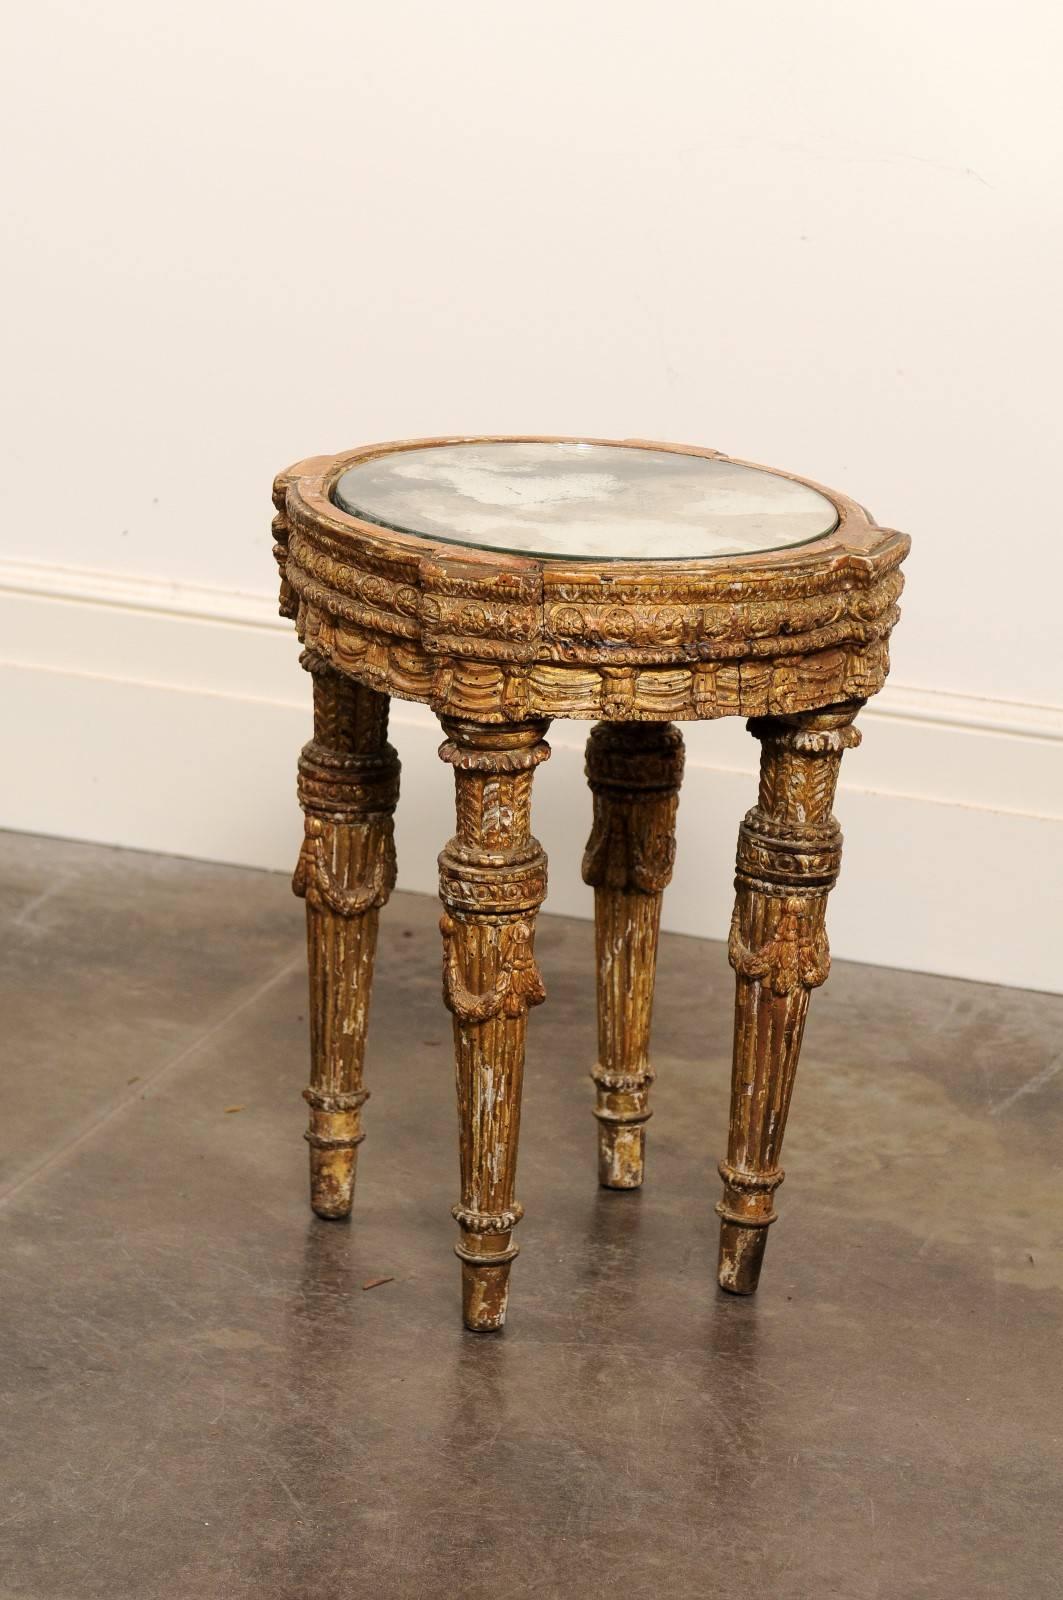 This Italian mid-18th century petite drinks table features a circular top with distressed mirror over a richly carved wooden base. The apron is adorned with various motifs such as egg-and-dart and rosettes in medallions. Four carved fluted tapering